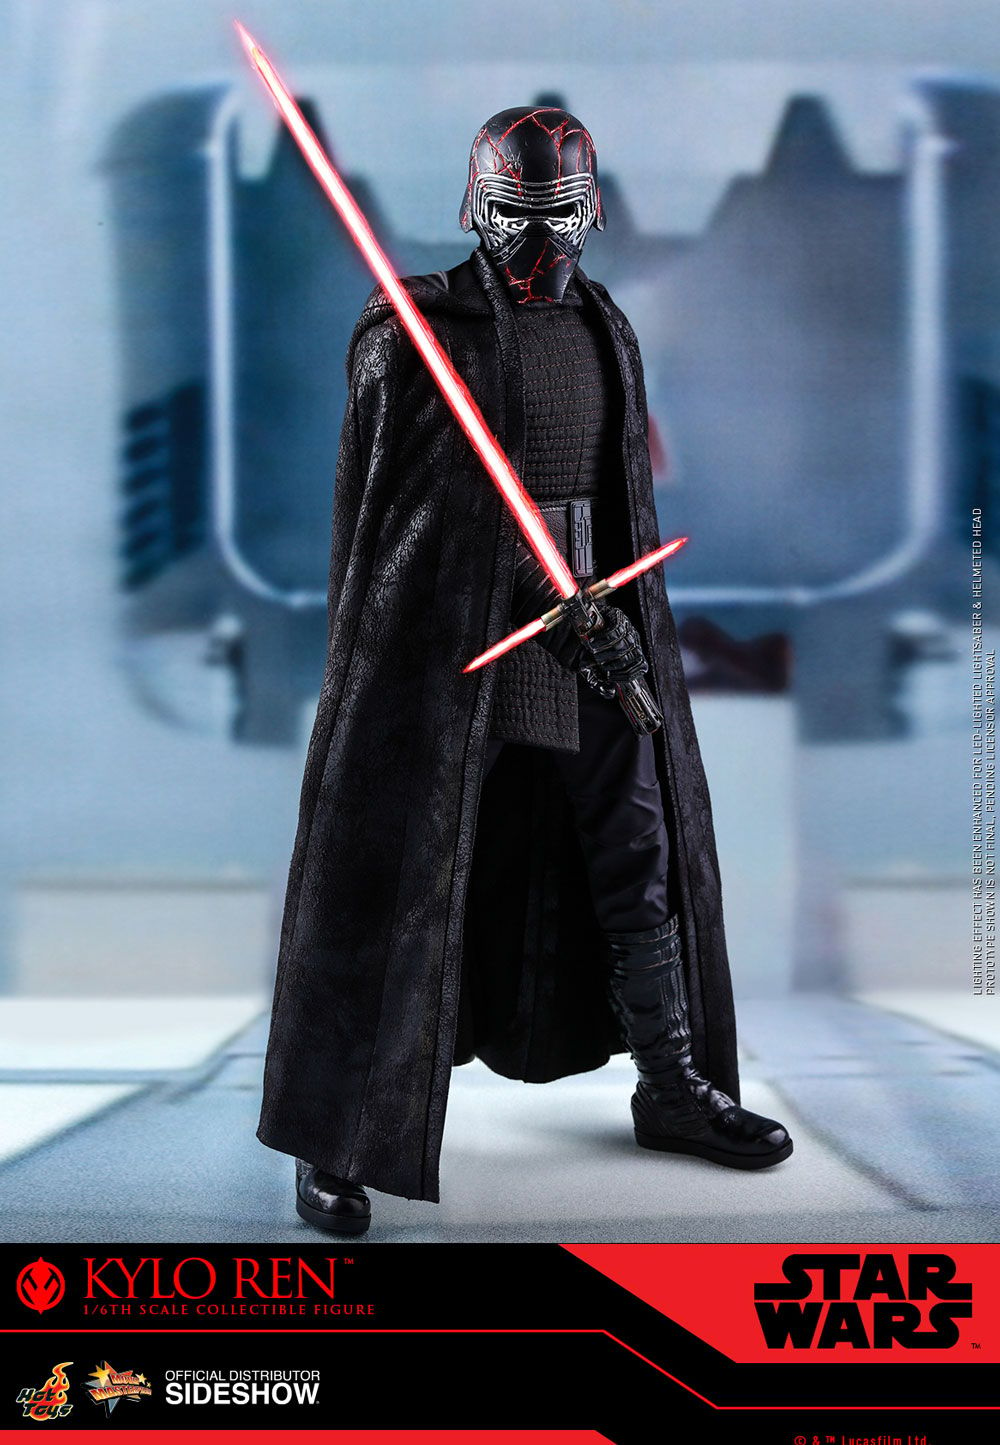 The Rise of Skywalker Collectible Action Figure for sale online Hasbro Star Wars The Black Series Supreme Leader Kylo Ren Toy 6-inch Scale Star Wars 